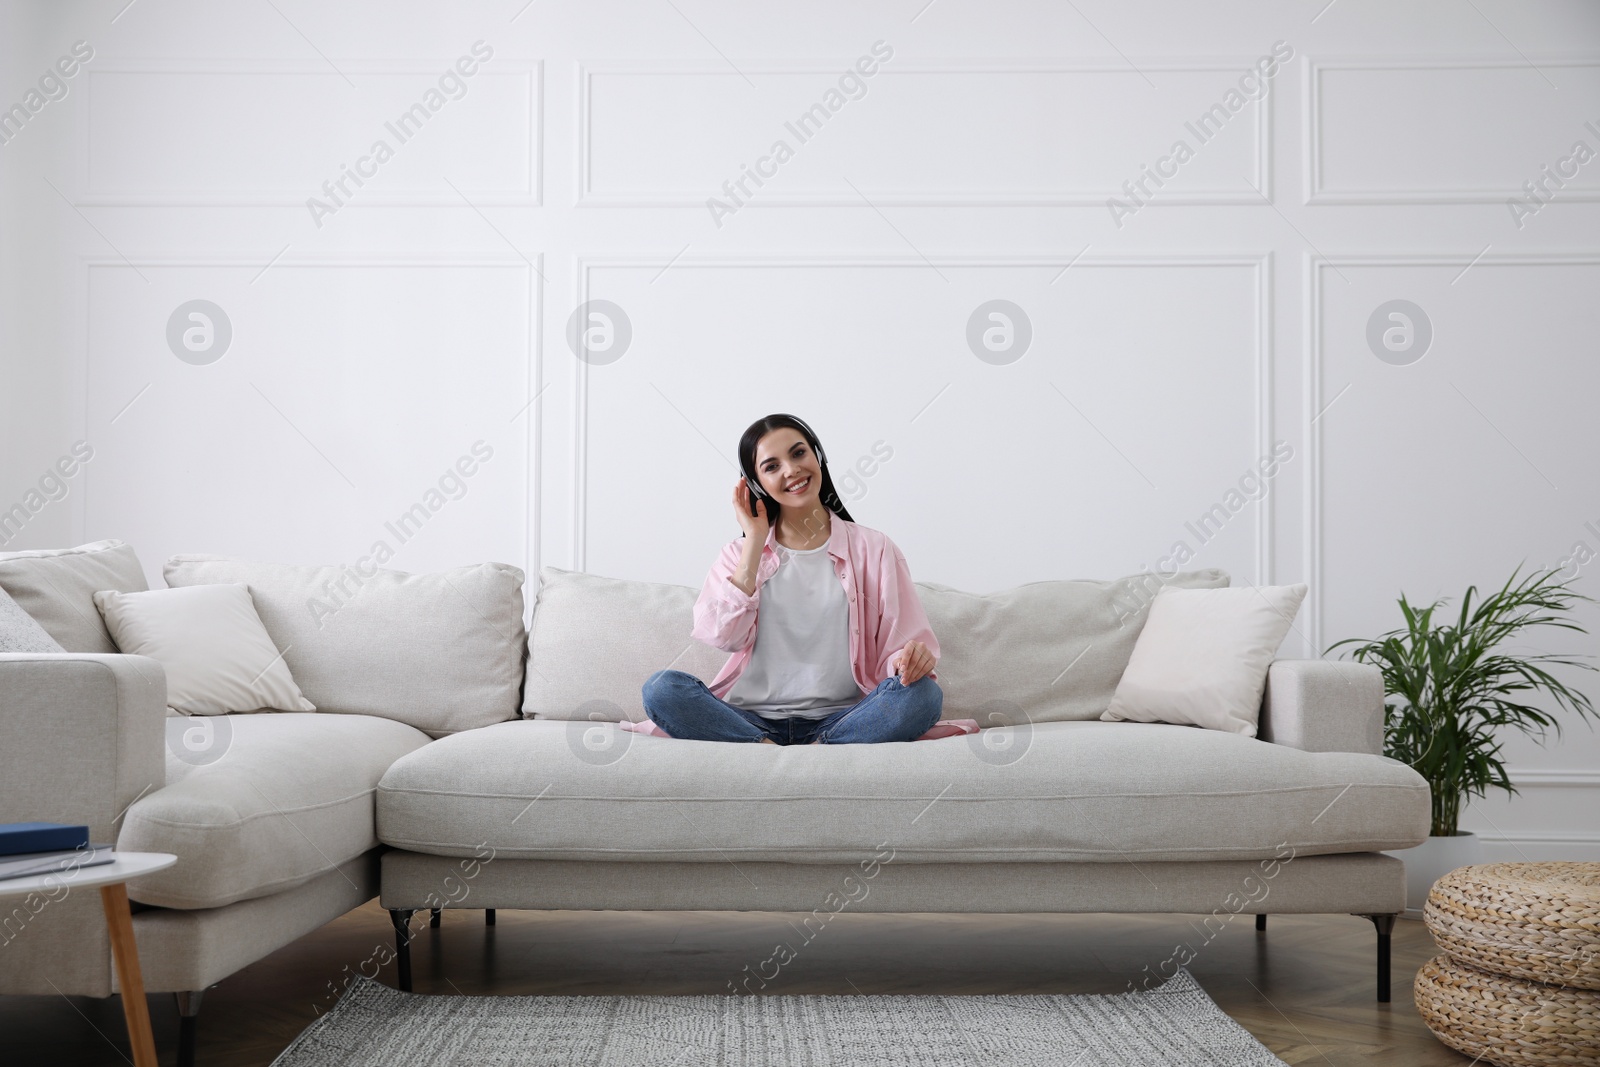 Photo of Woman with headphones on sofa in living room